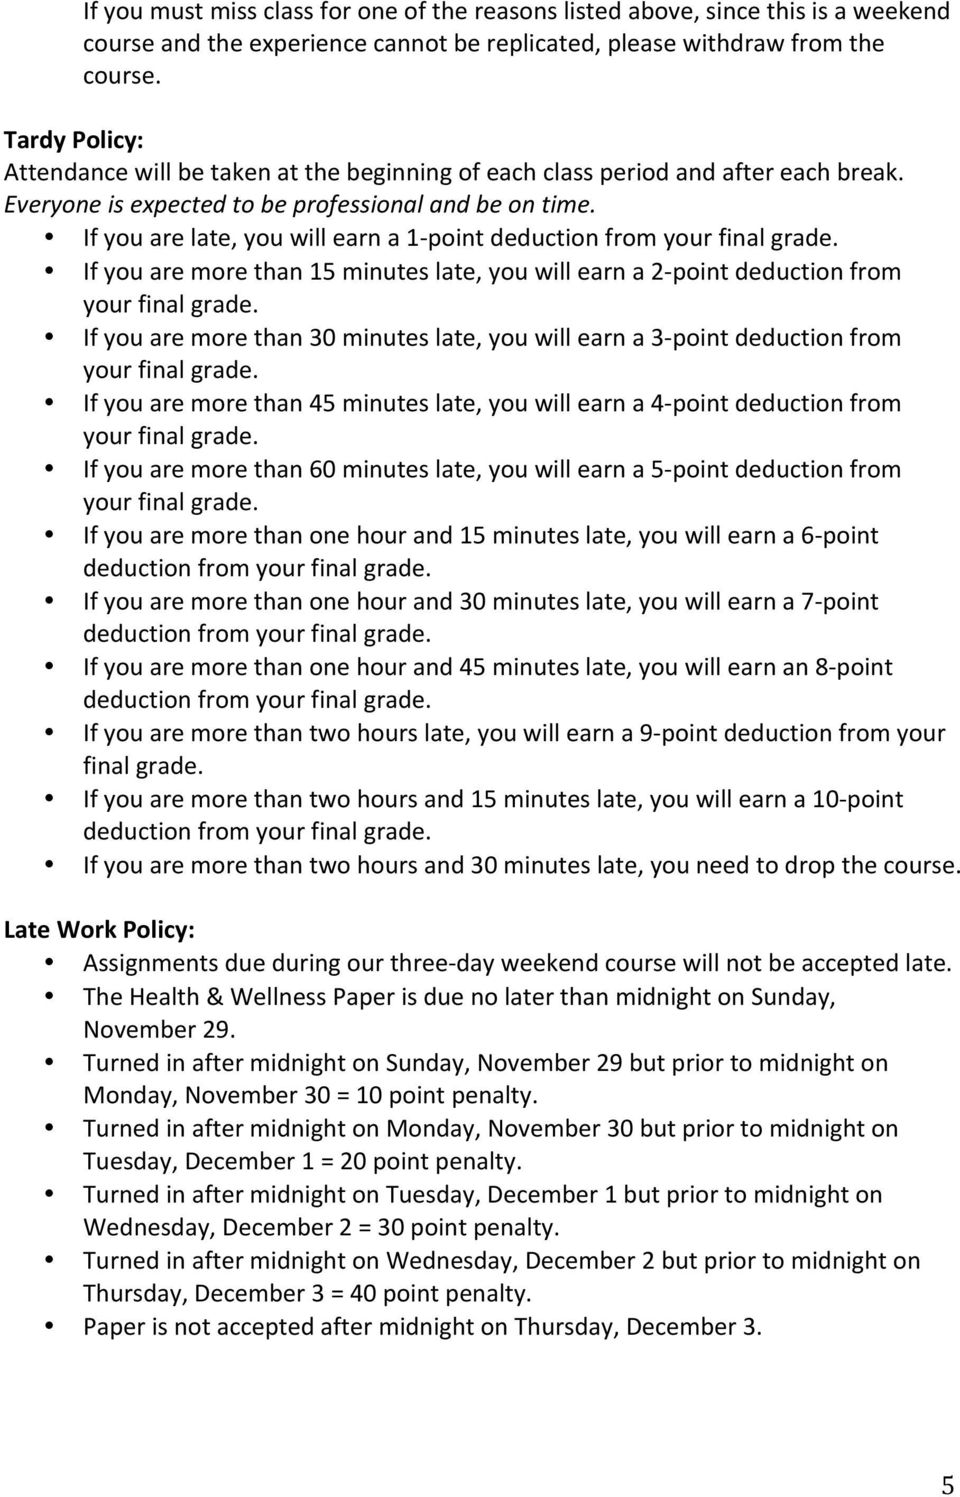 If you are late, you will earn a 1- point deduction from your final grade. If you are more than 15 minutes late, you will earn a 2- point deduction from your final grade.